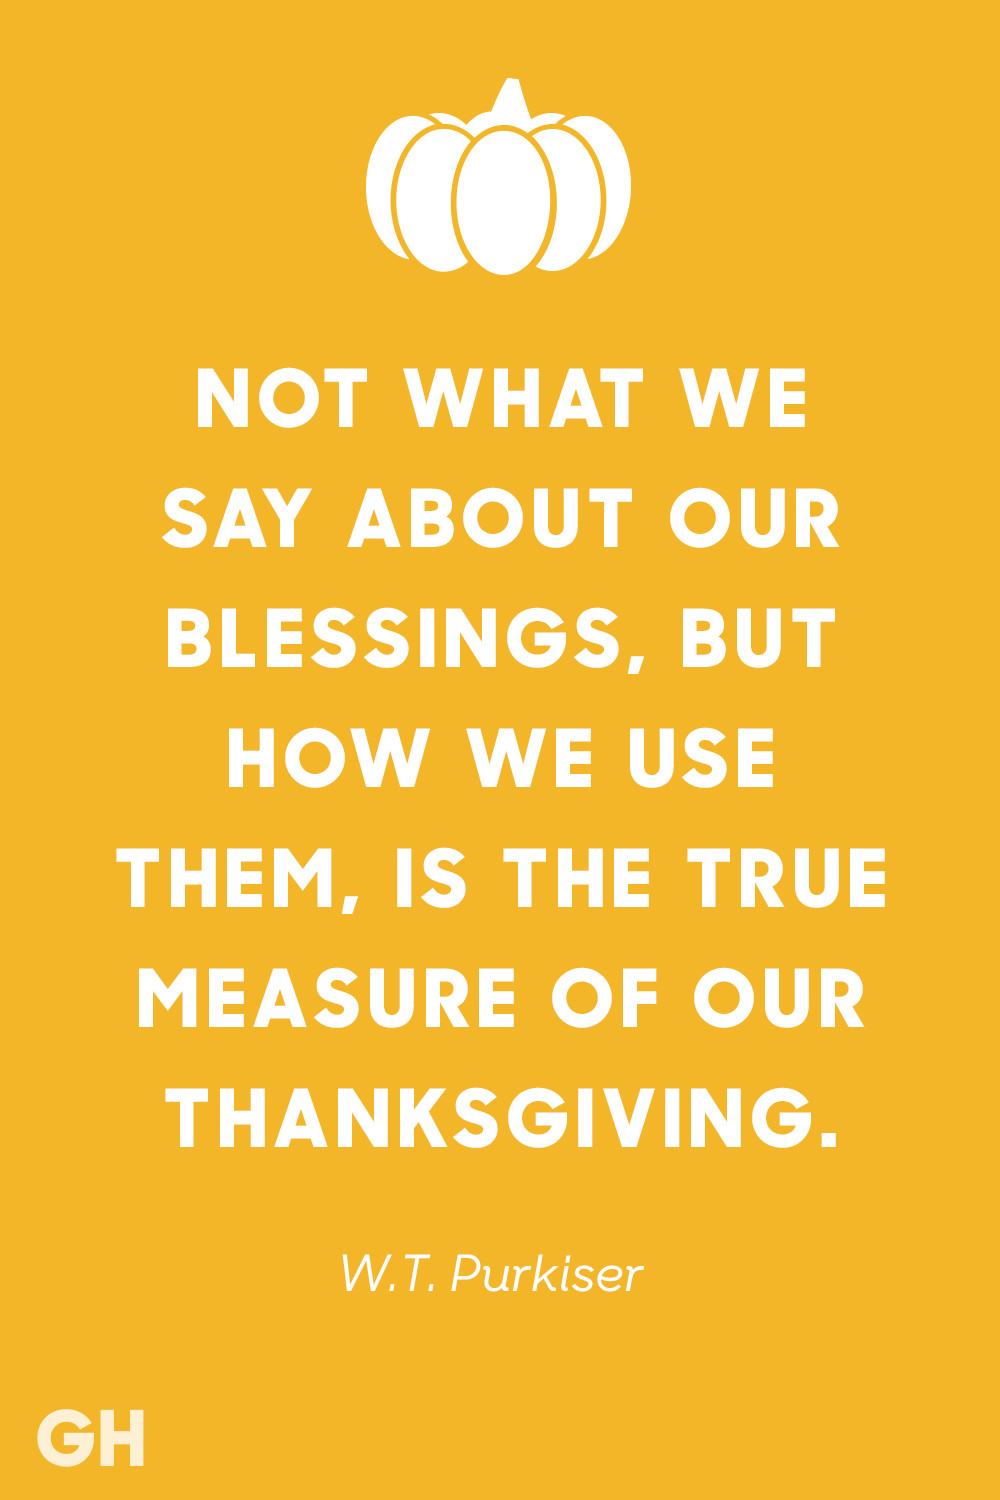 Quote About Thanksgiving
 15 Best Thanksgiving Quotes Inspirational and Funny